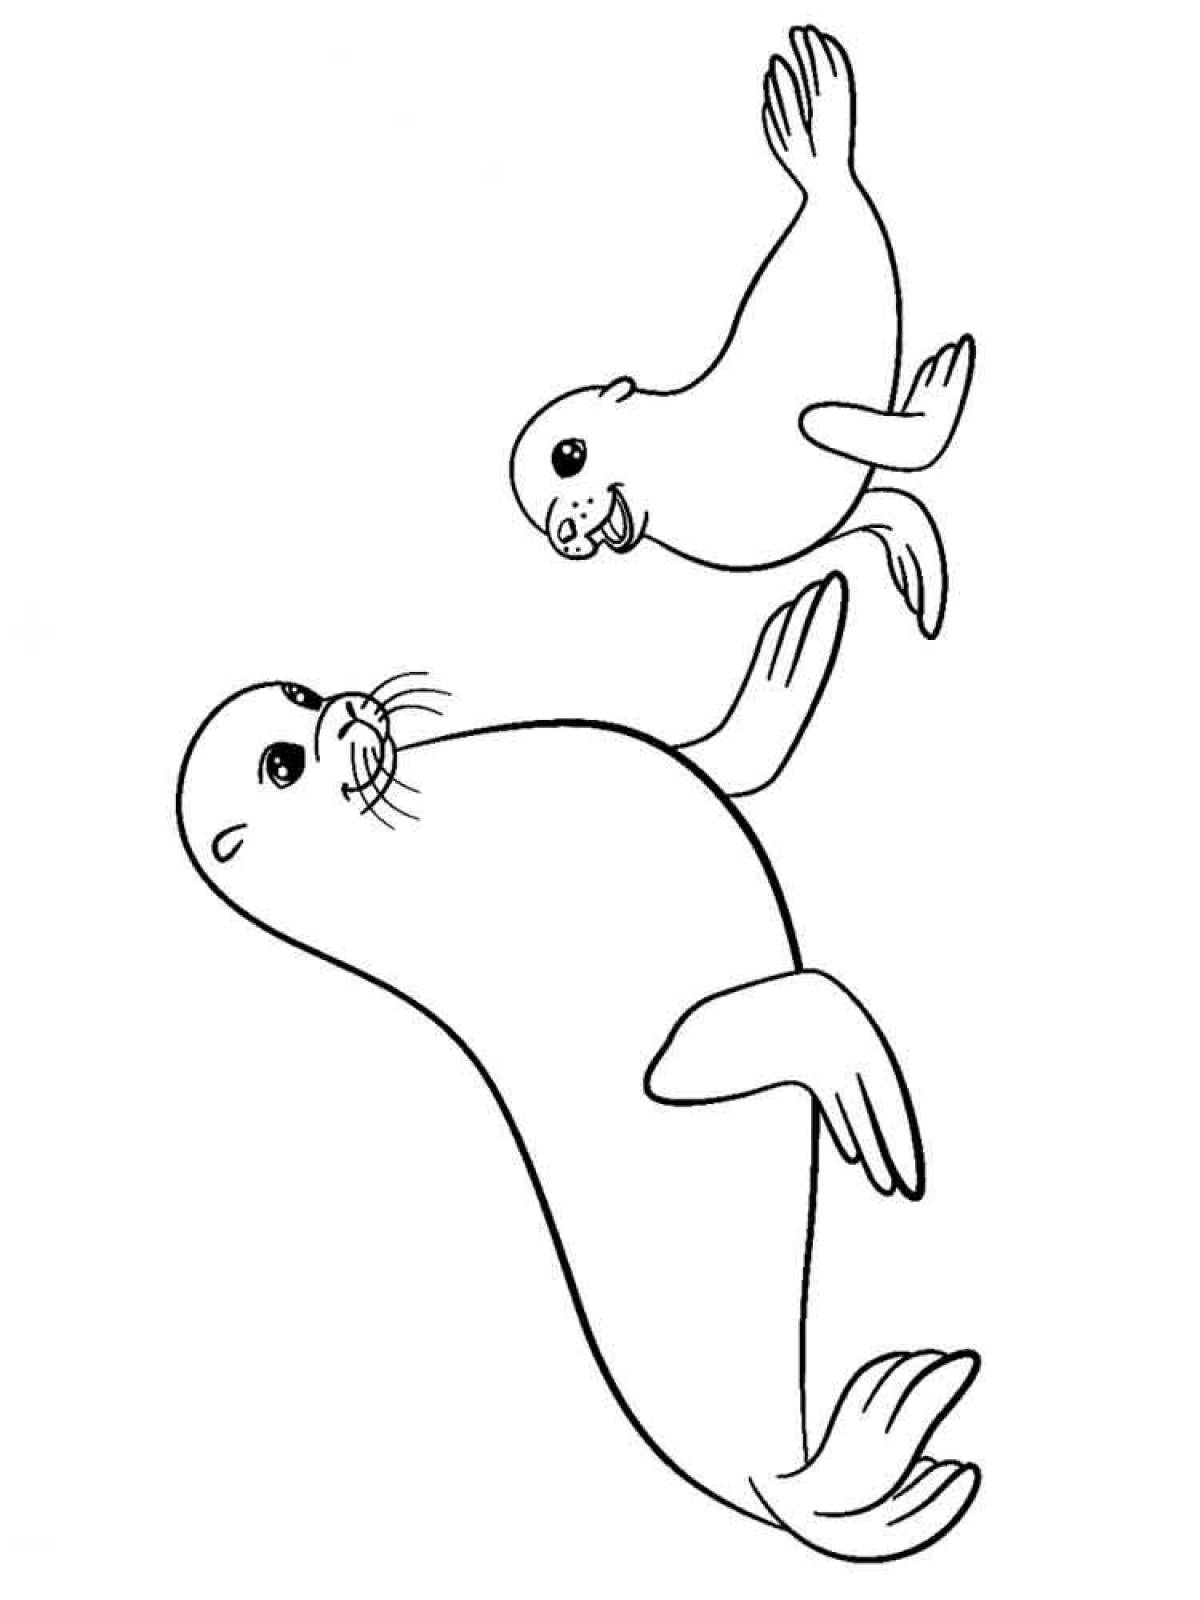 Seal for kids #11